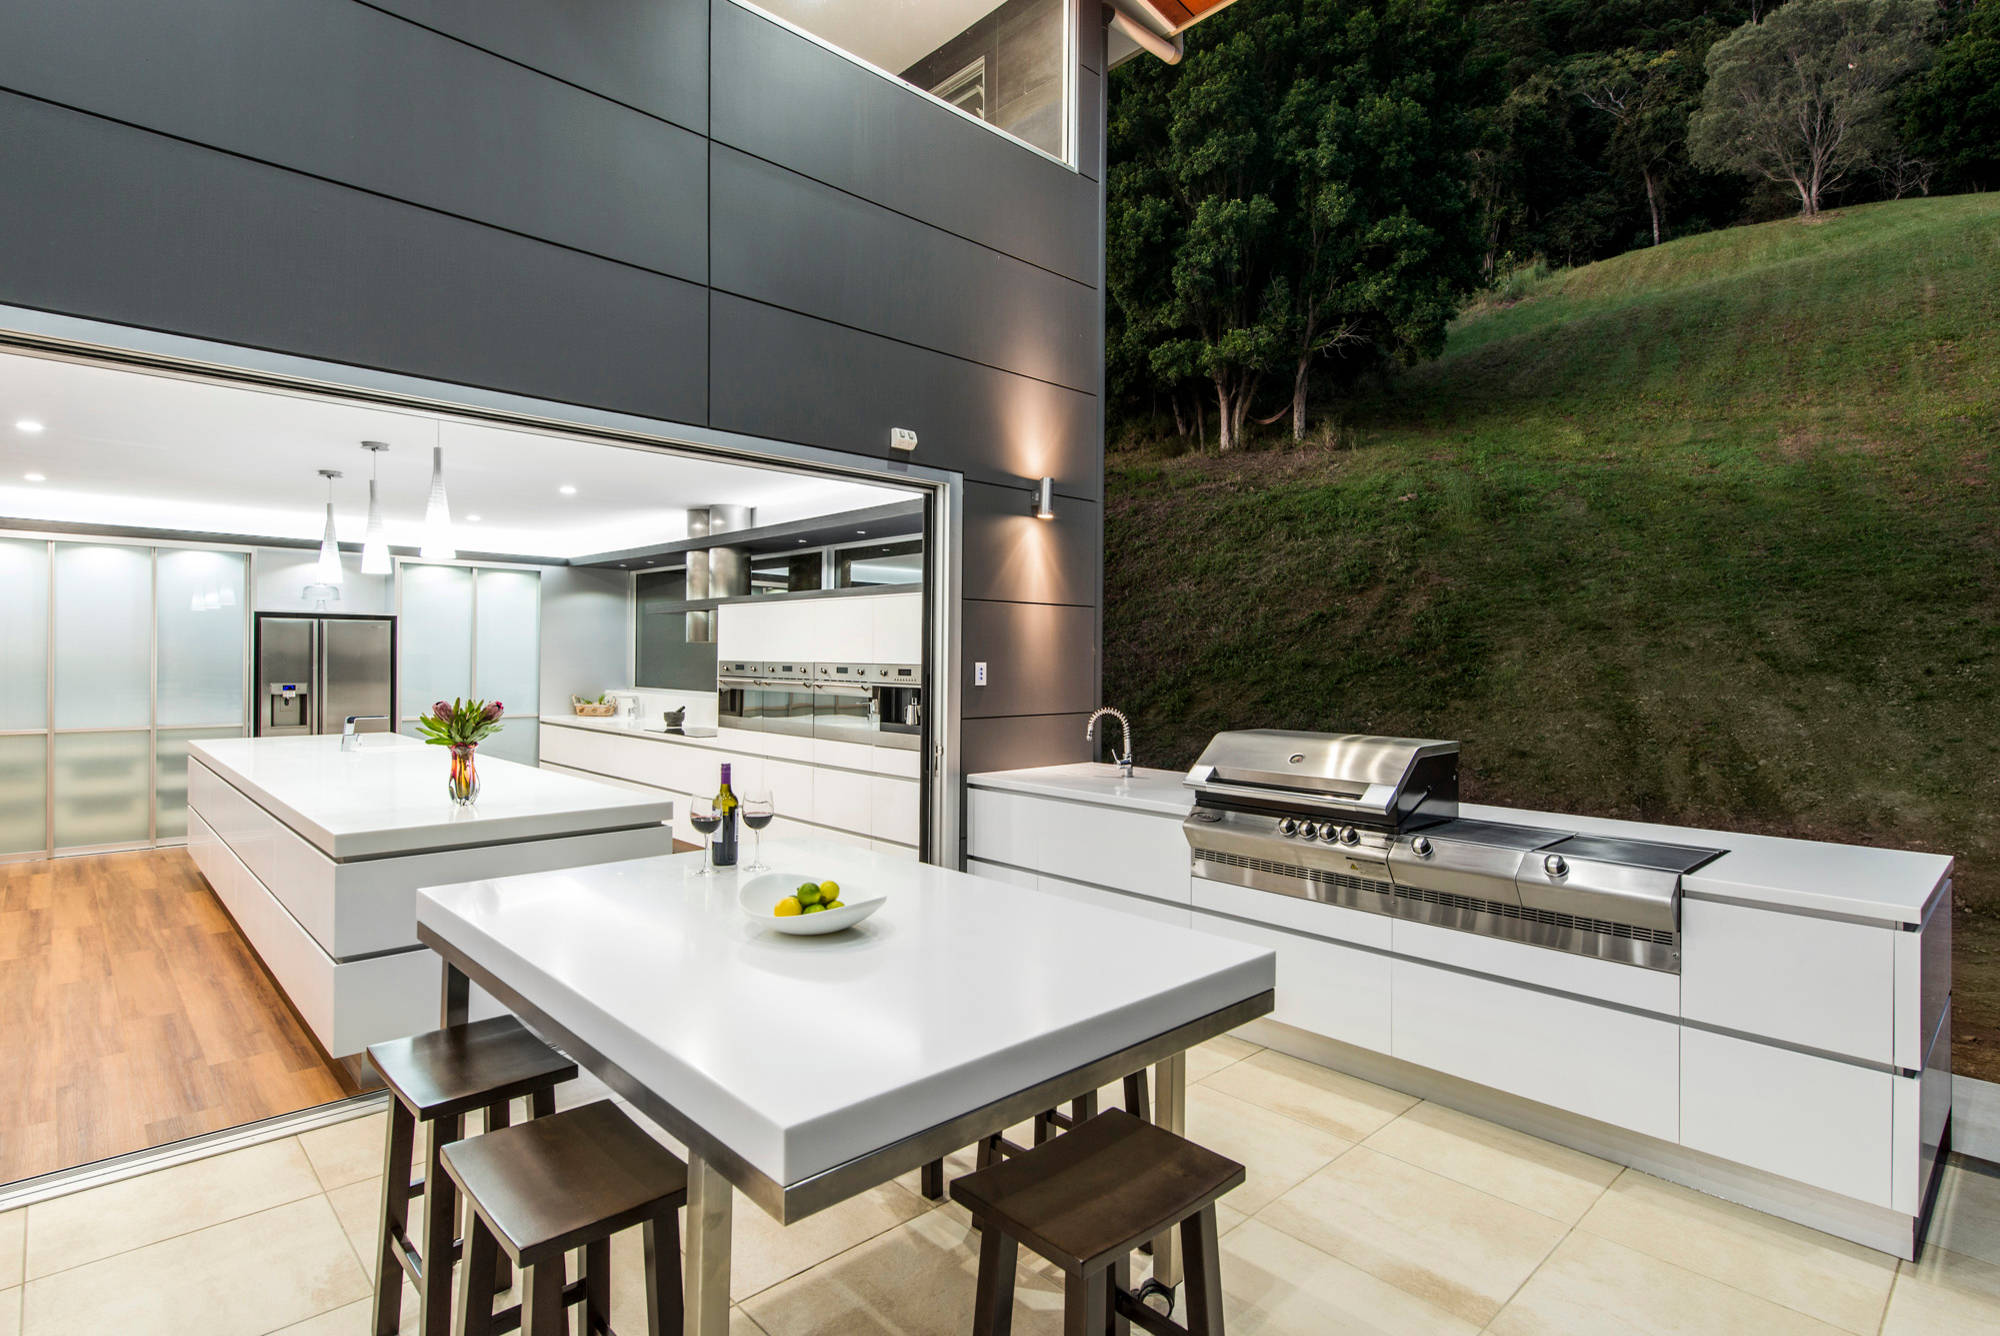 https://st.hzcdn.com/simgs/pictures/kitchens/brisbane-samford-kitchen-kim-duffin-for-sublime-luxury-kitchens-and-bathrooms-img~9dc13ab101e0c72a_14-0129-1-86830b6.jpg